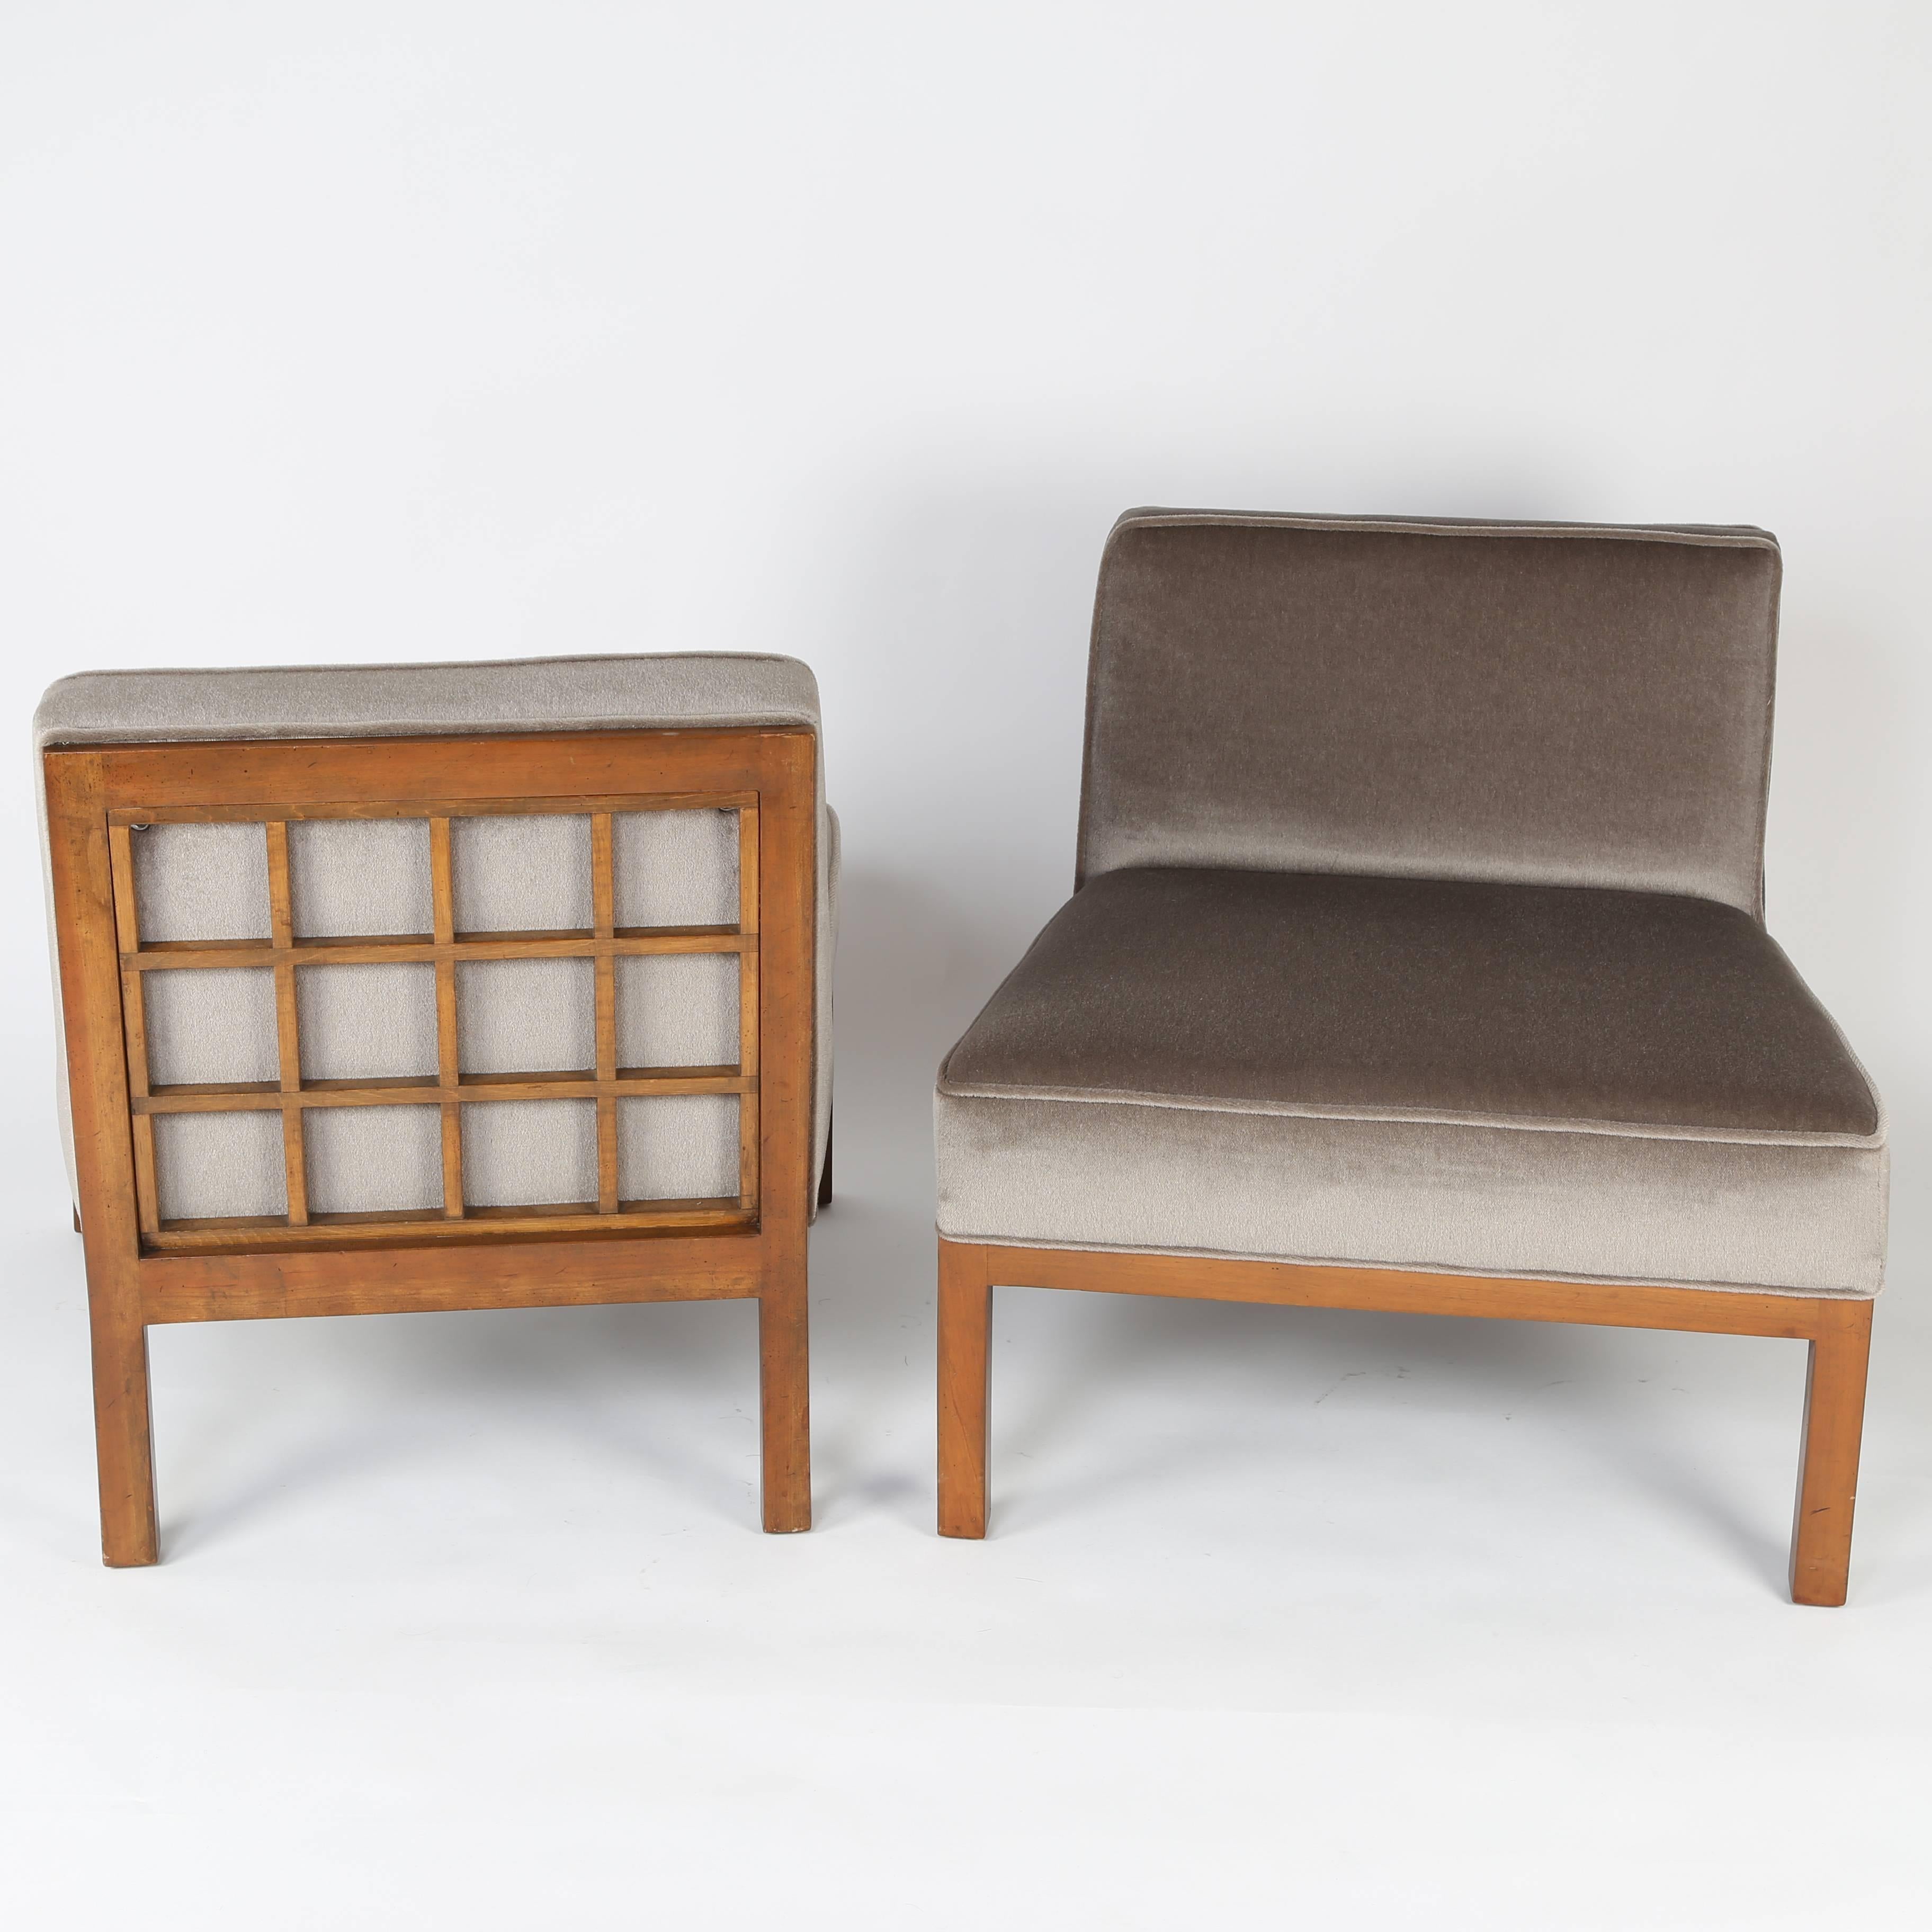 Chic pair of 1960s slipper chairs whose clean, modern lines contrast nicely with the wooden frames on the backs of each seat. From the Far East collection for Baker. New warm-brown mohair upholstery over new foam. These chairs are in our Brooklyn